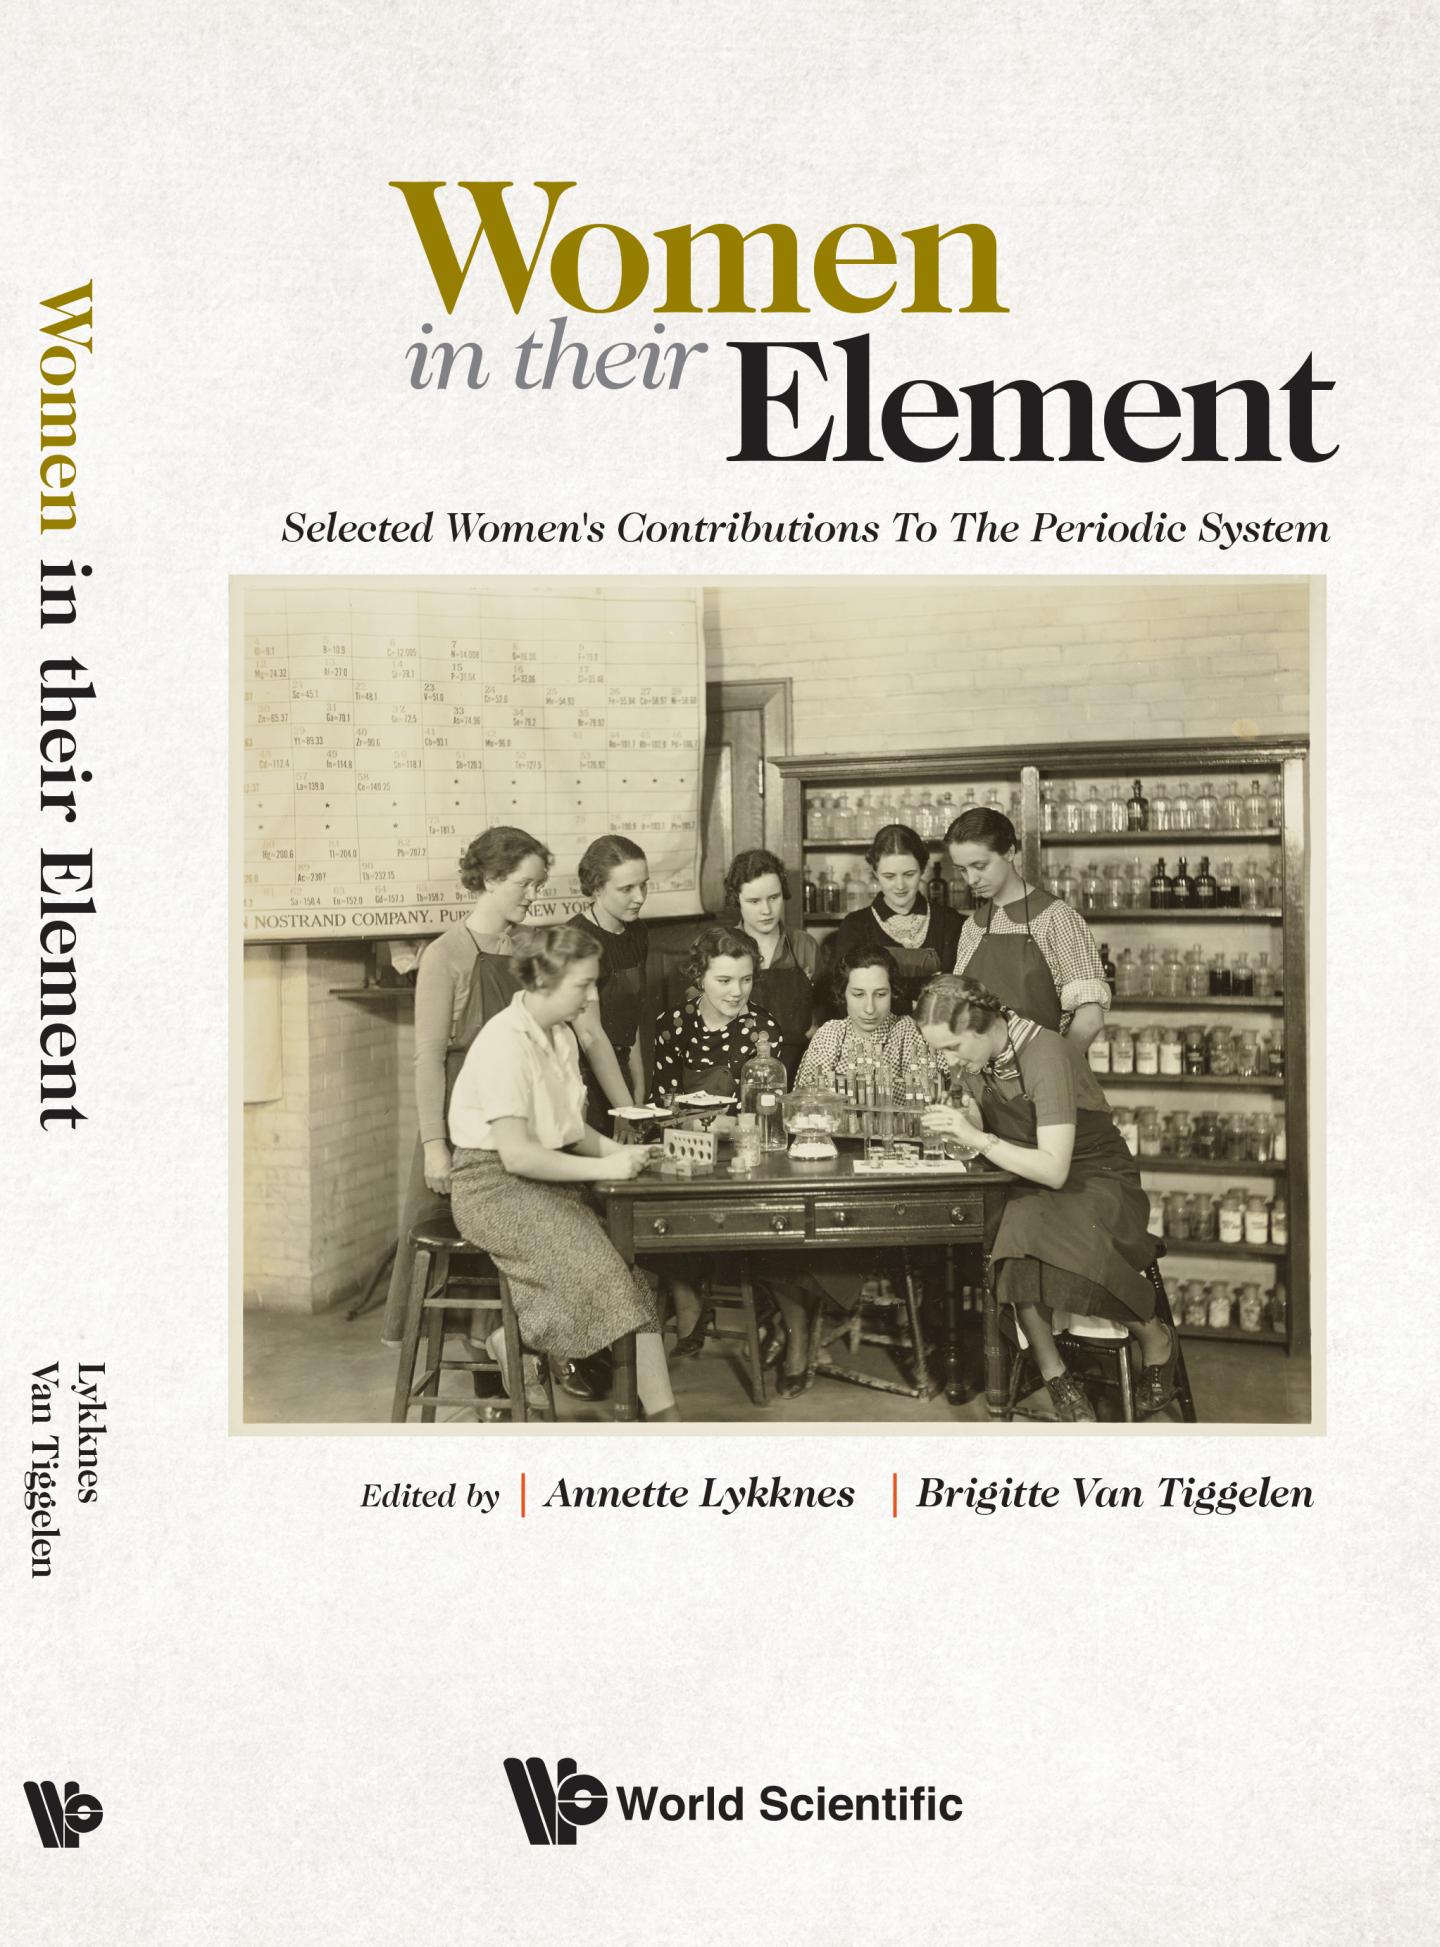 Women in their Element: Selected Women's Contributions to the Periodic Table